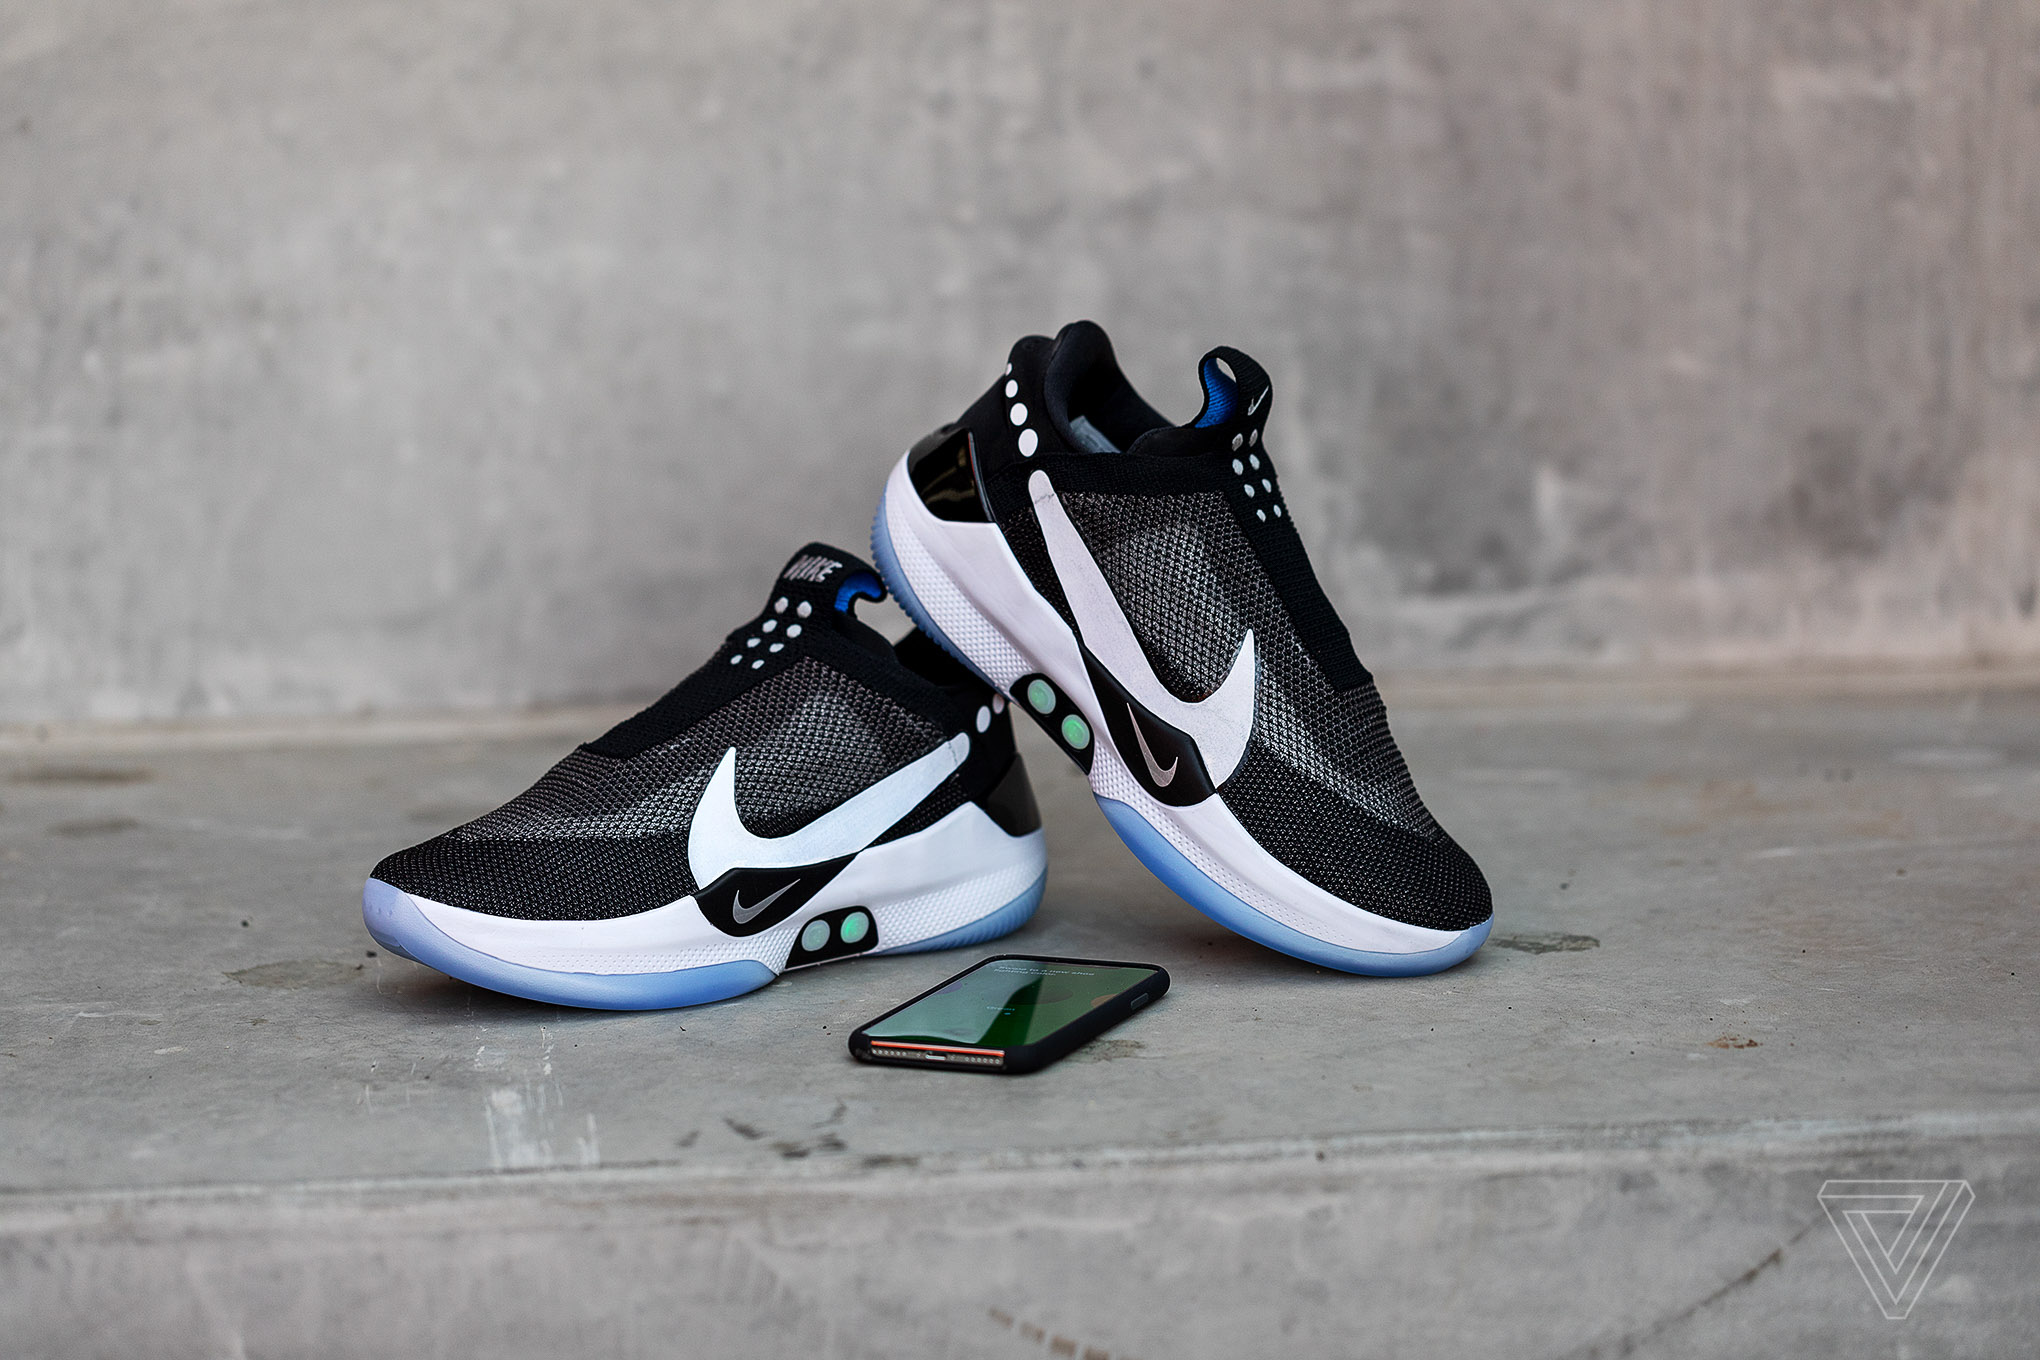 Perforar Arreglo Viscoso Nike's Adapt BB self-lacing sneakers let you tie your shoes from an app -  The Verge